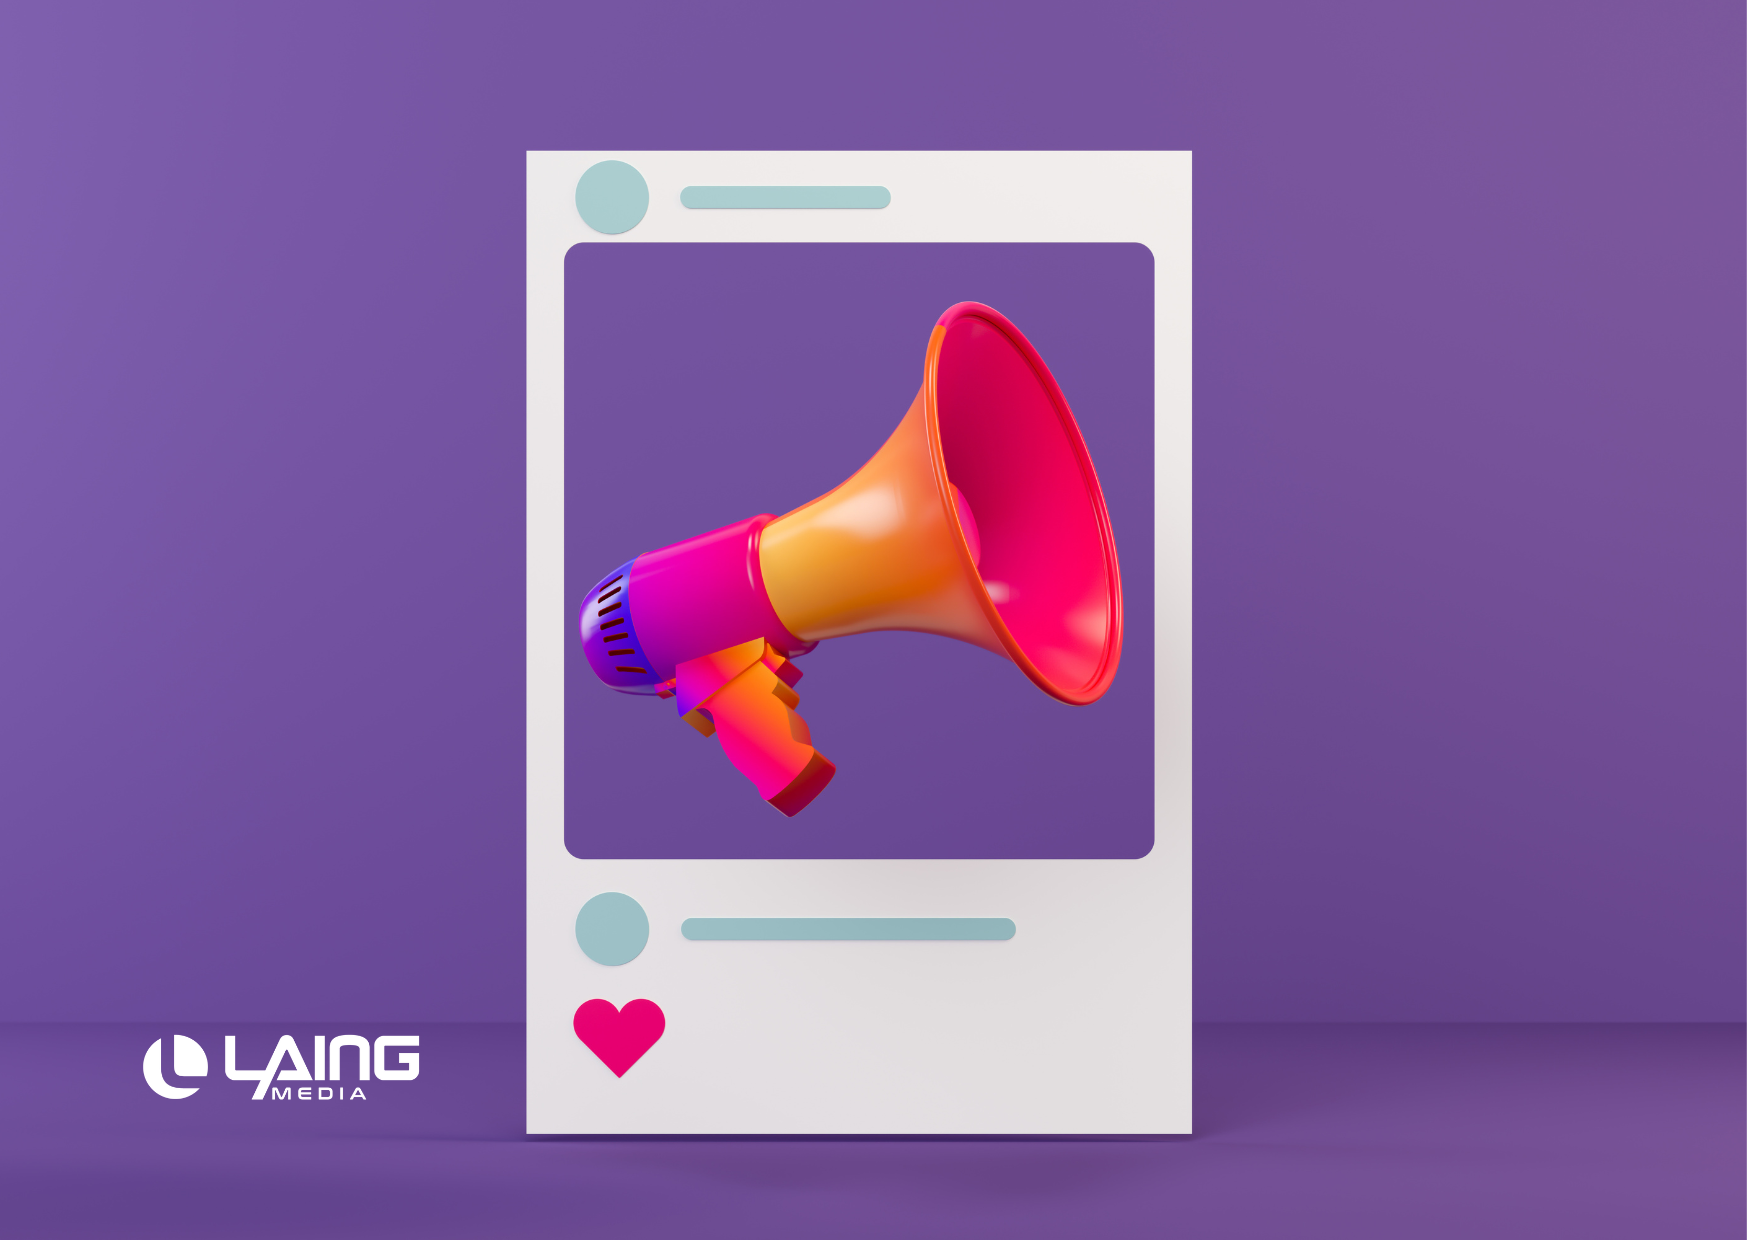 Purple background with colorful megaphone in Instagram post format with Laing Media logo in the bottom